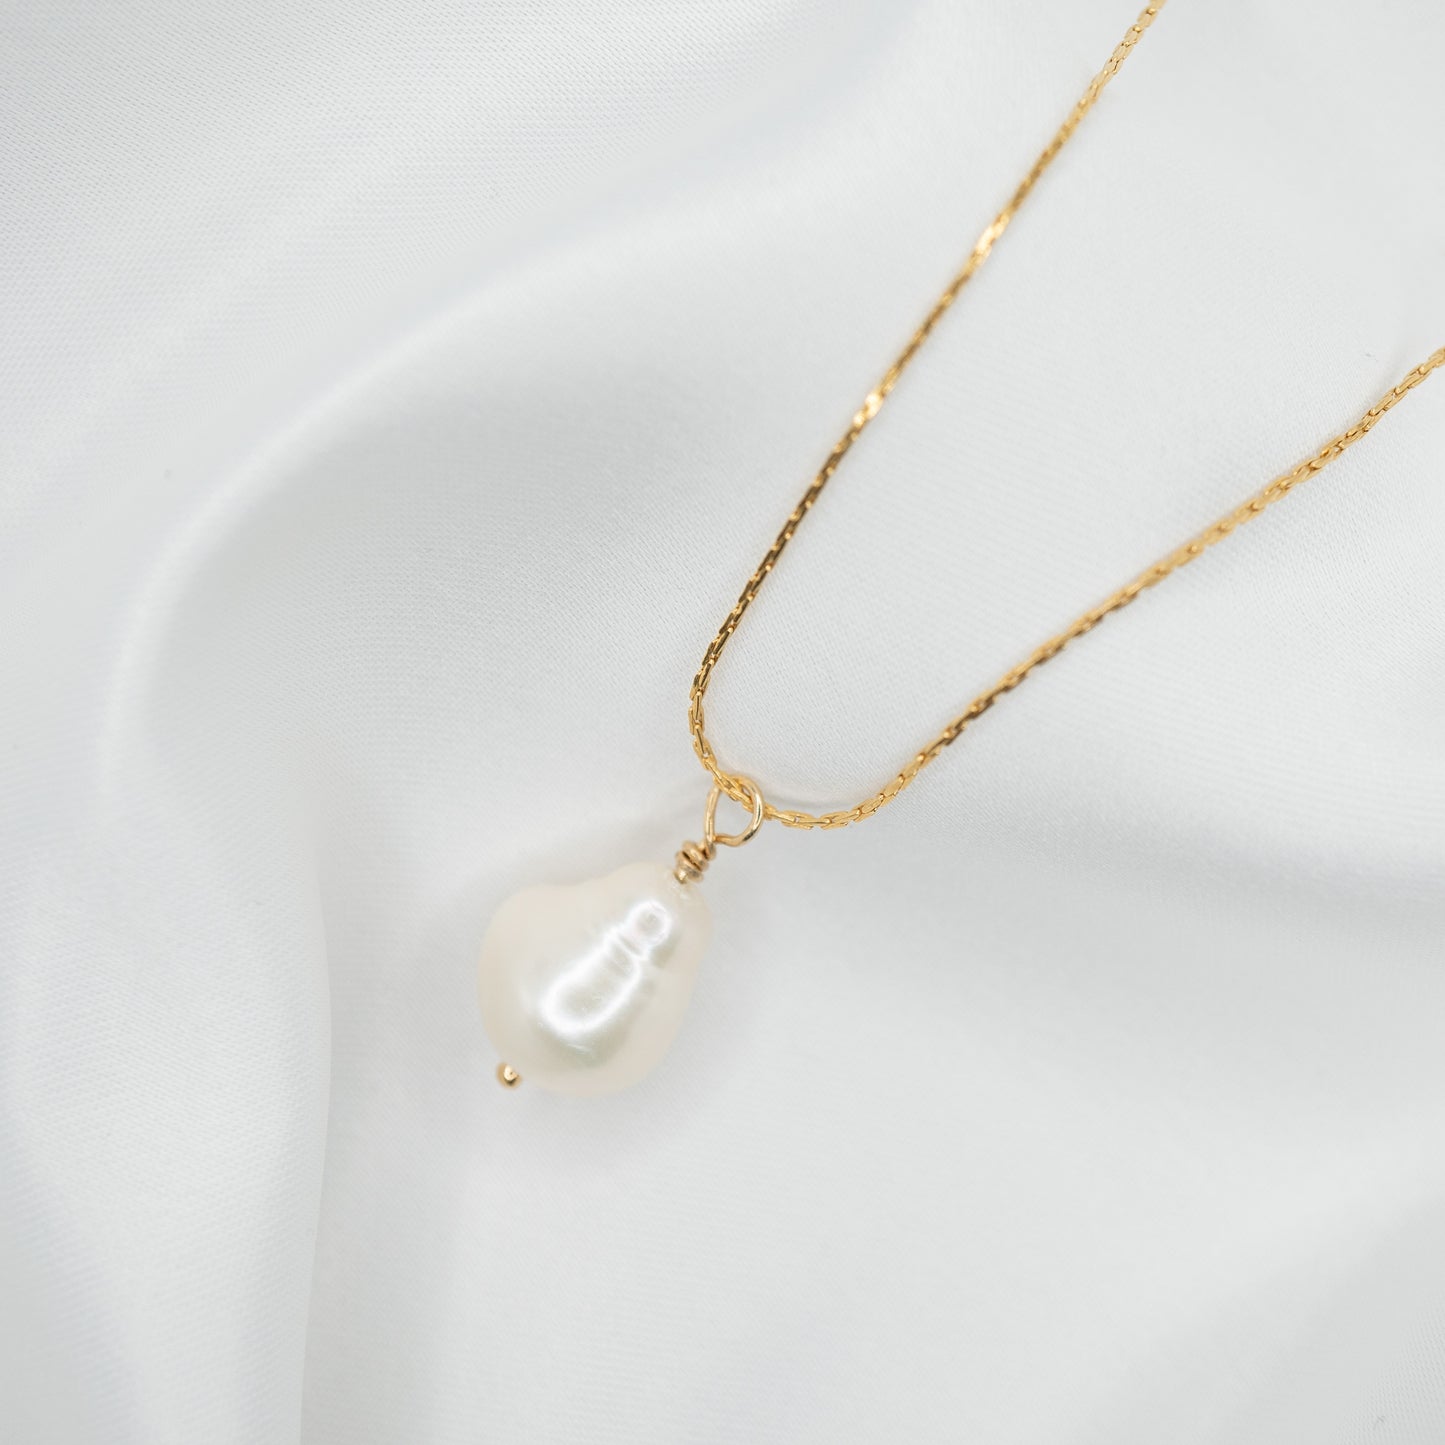 Gold Filled Baroque Pearl Pendant and Necklace - shot on white